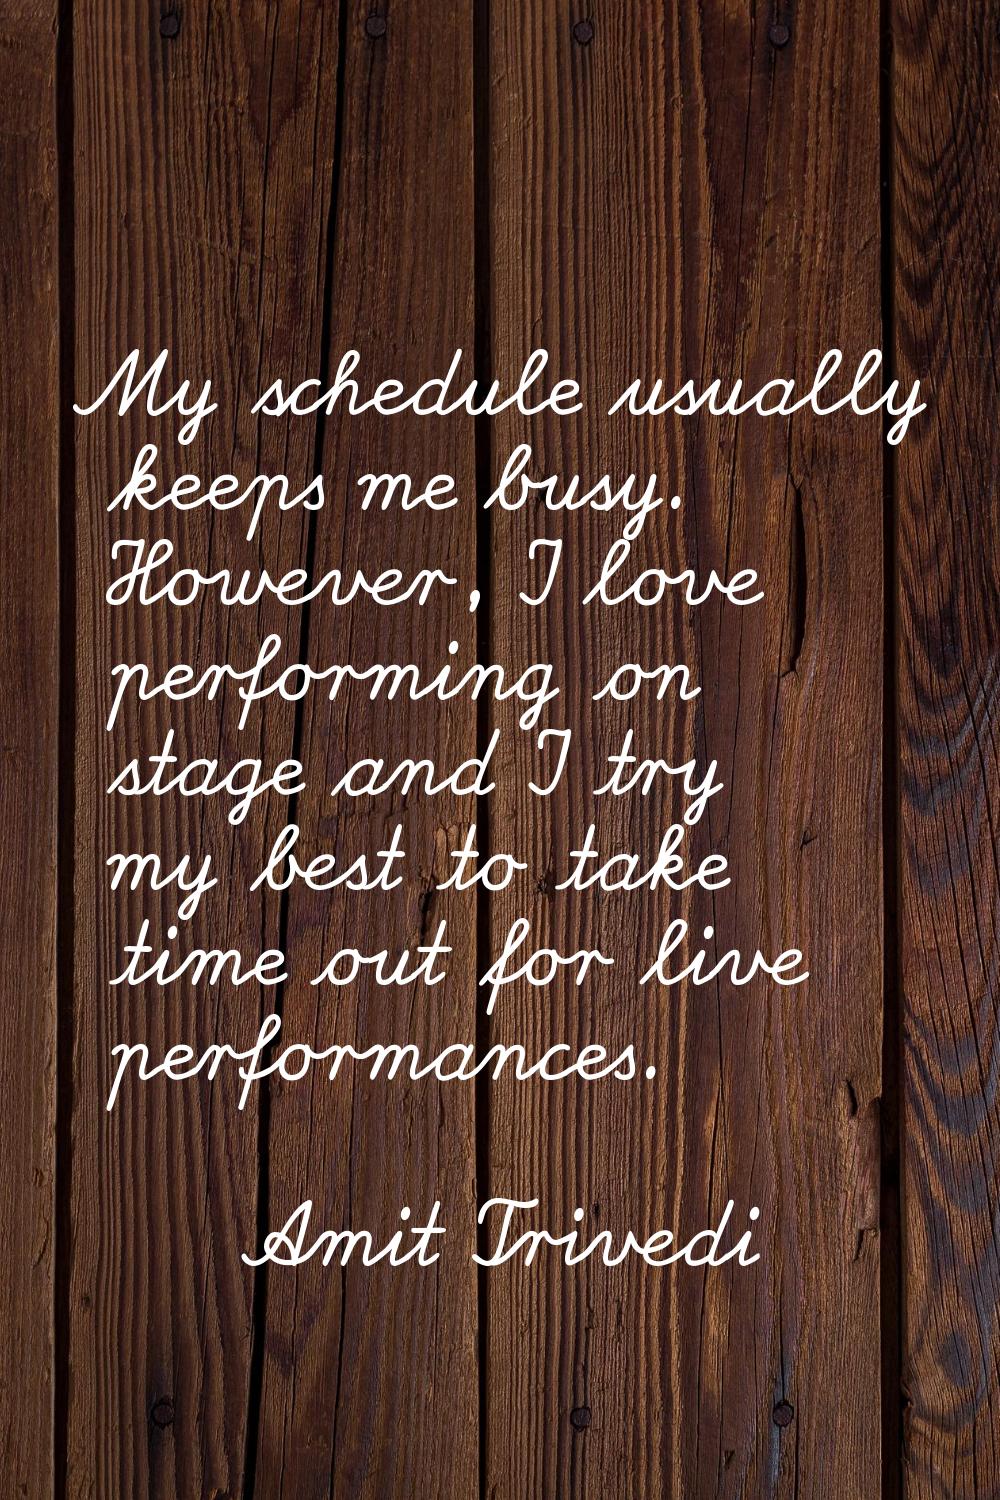 My schedule usually keeps me busy. However, I love performing on stage and I try my best to take ti